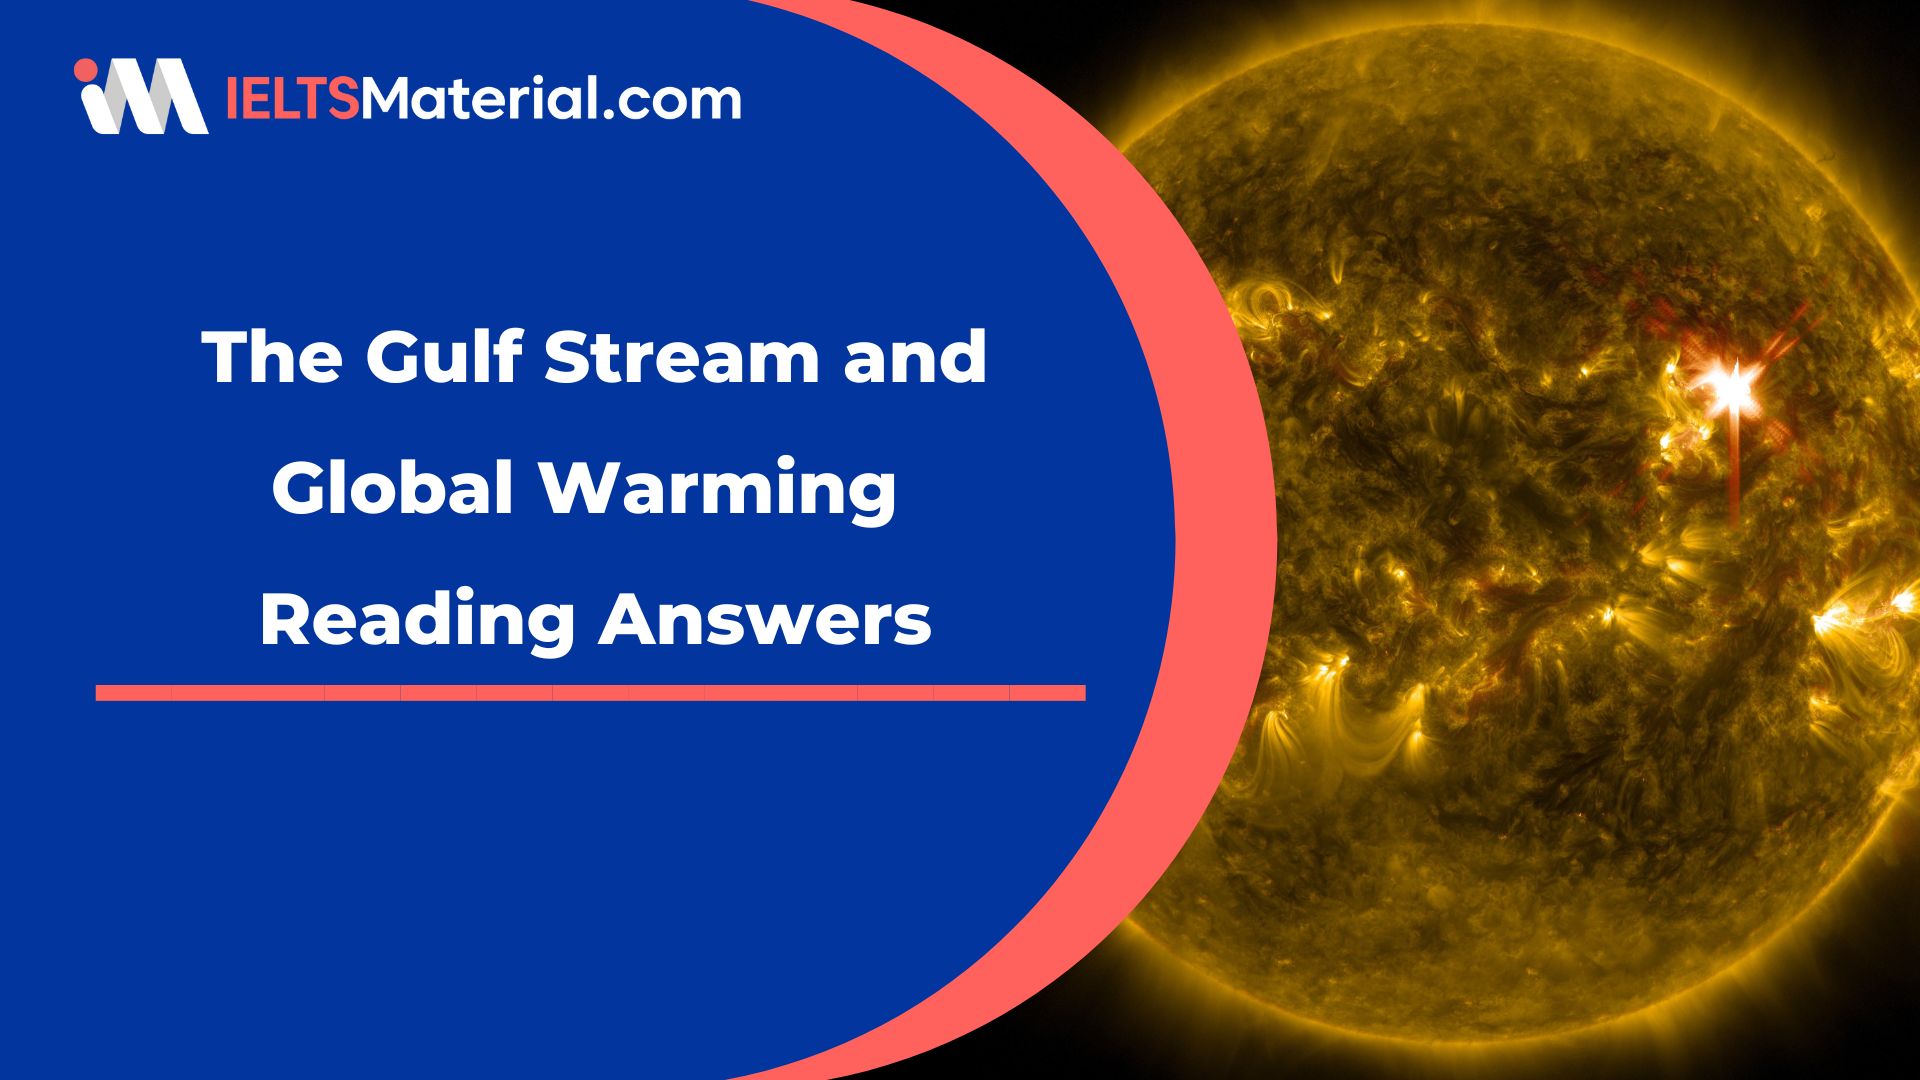 The Gulf Stream and Global Warming Reading Answers